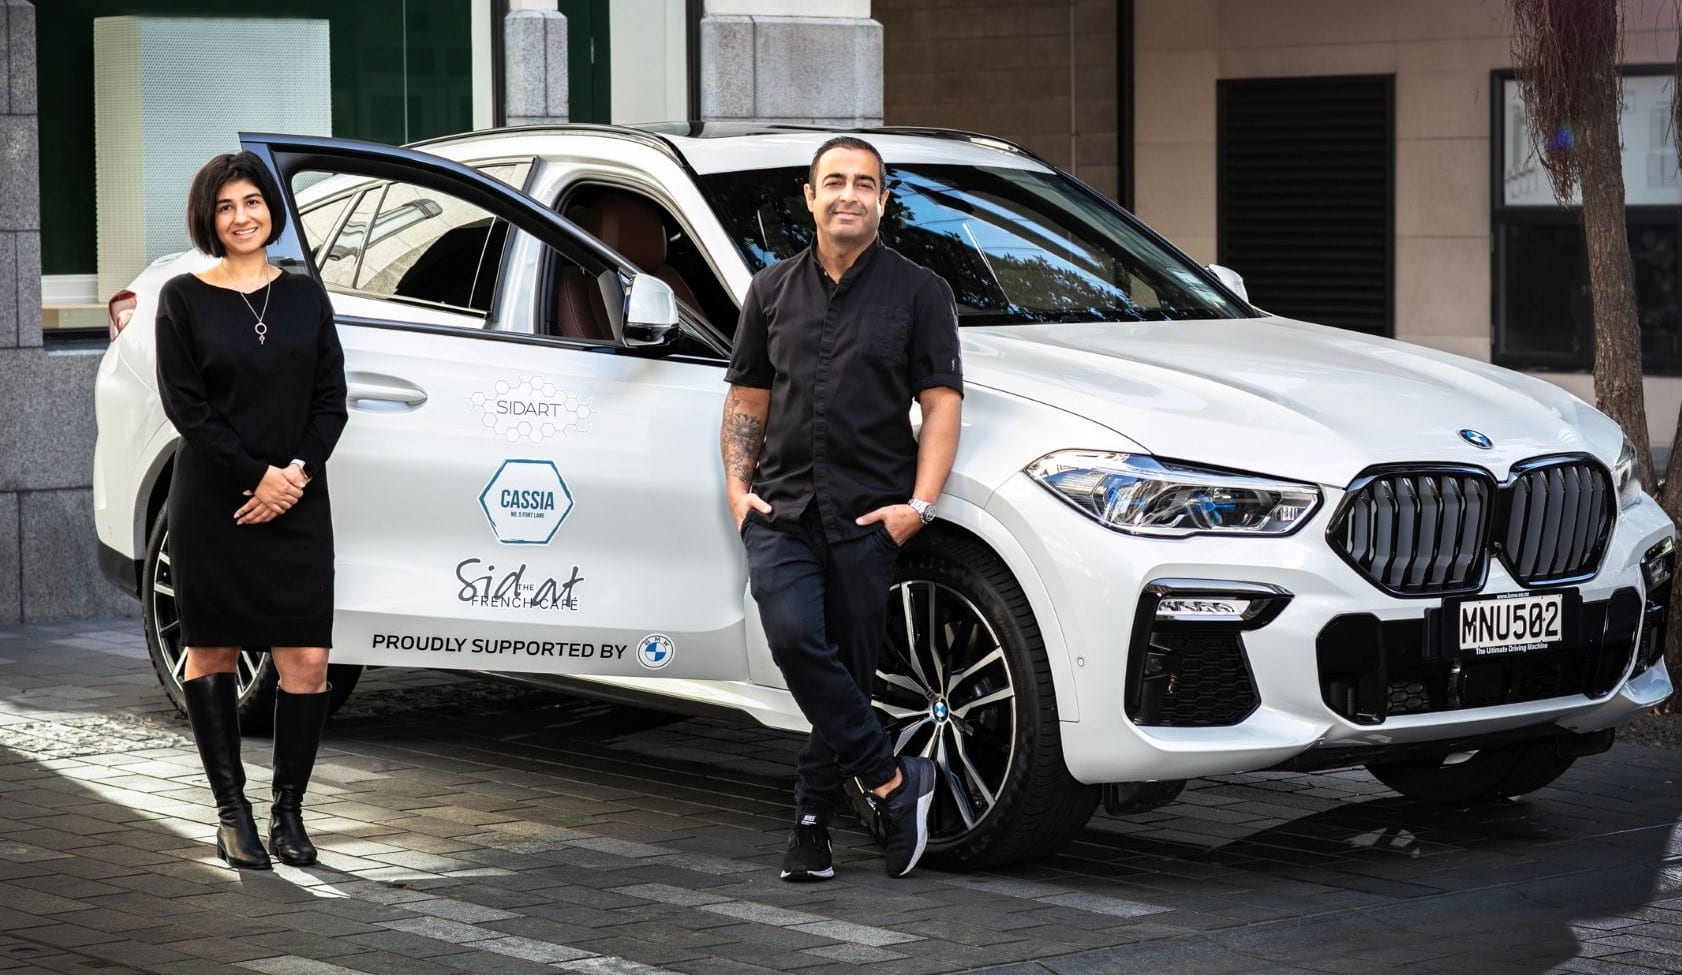 BMW supports the re-opening of Sid Sahrawat restaurants for food delivery